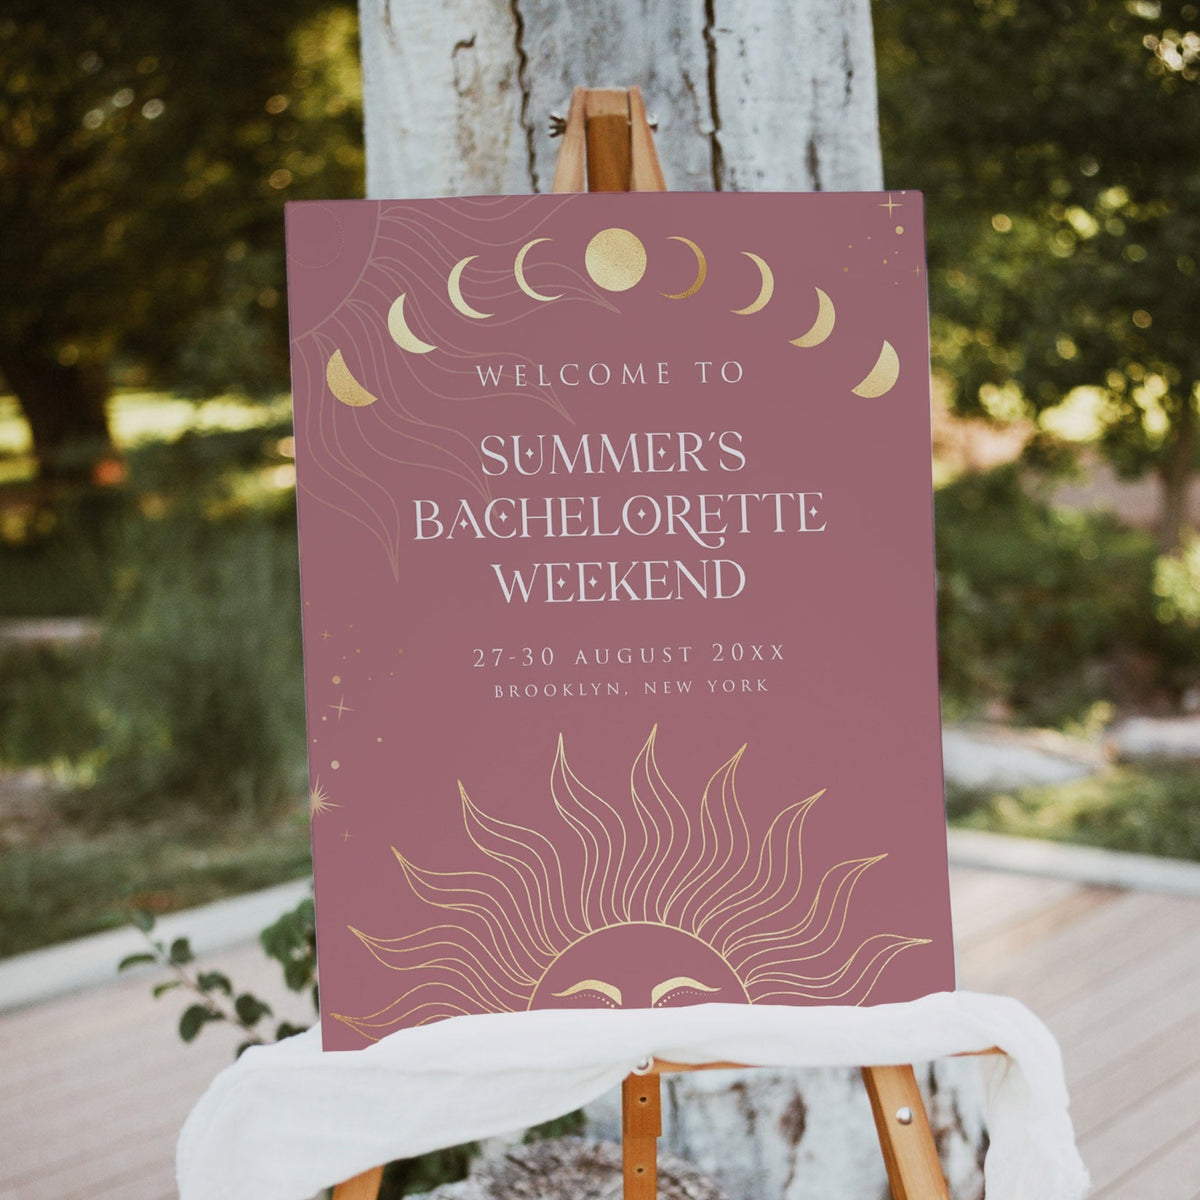 Fully editable and printable bachelorette weekend welcome sign with a celestial design. Perfect for a celestial bridal shower themed party